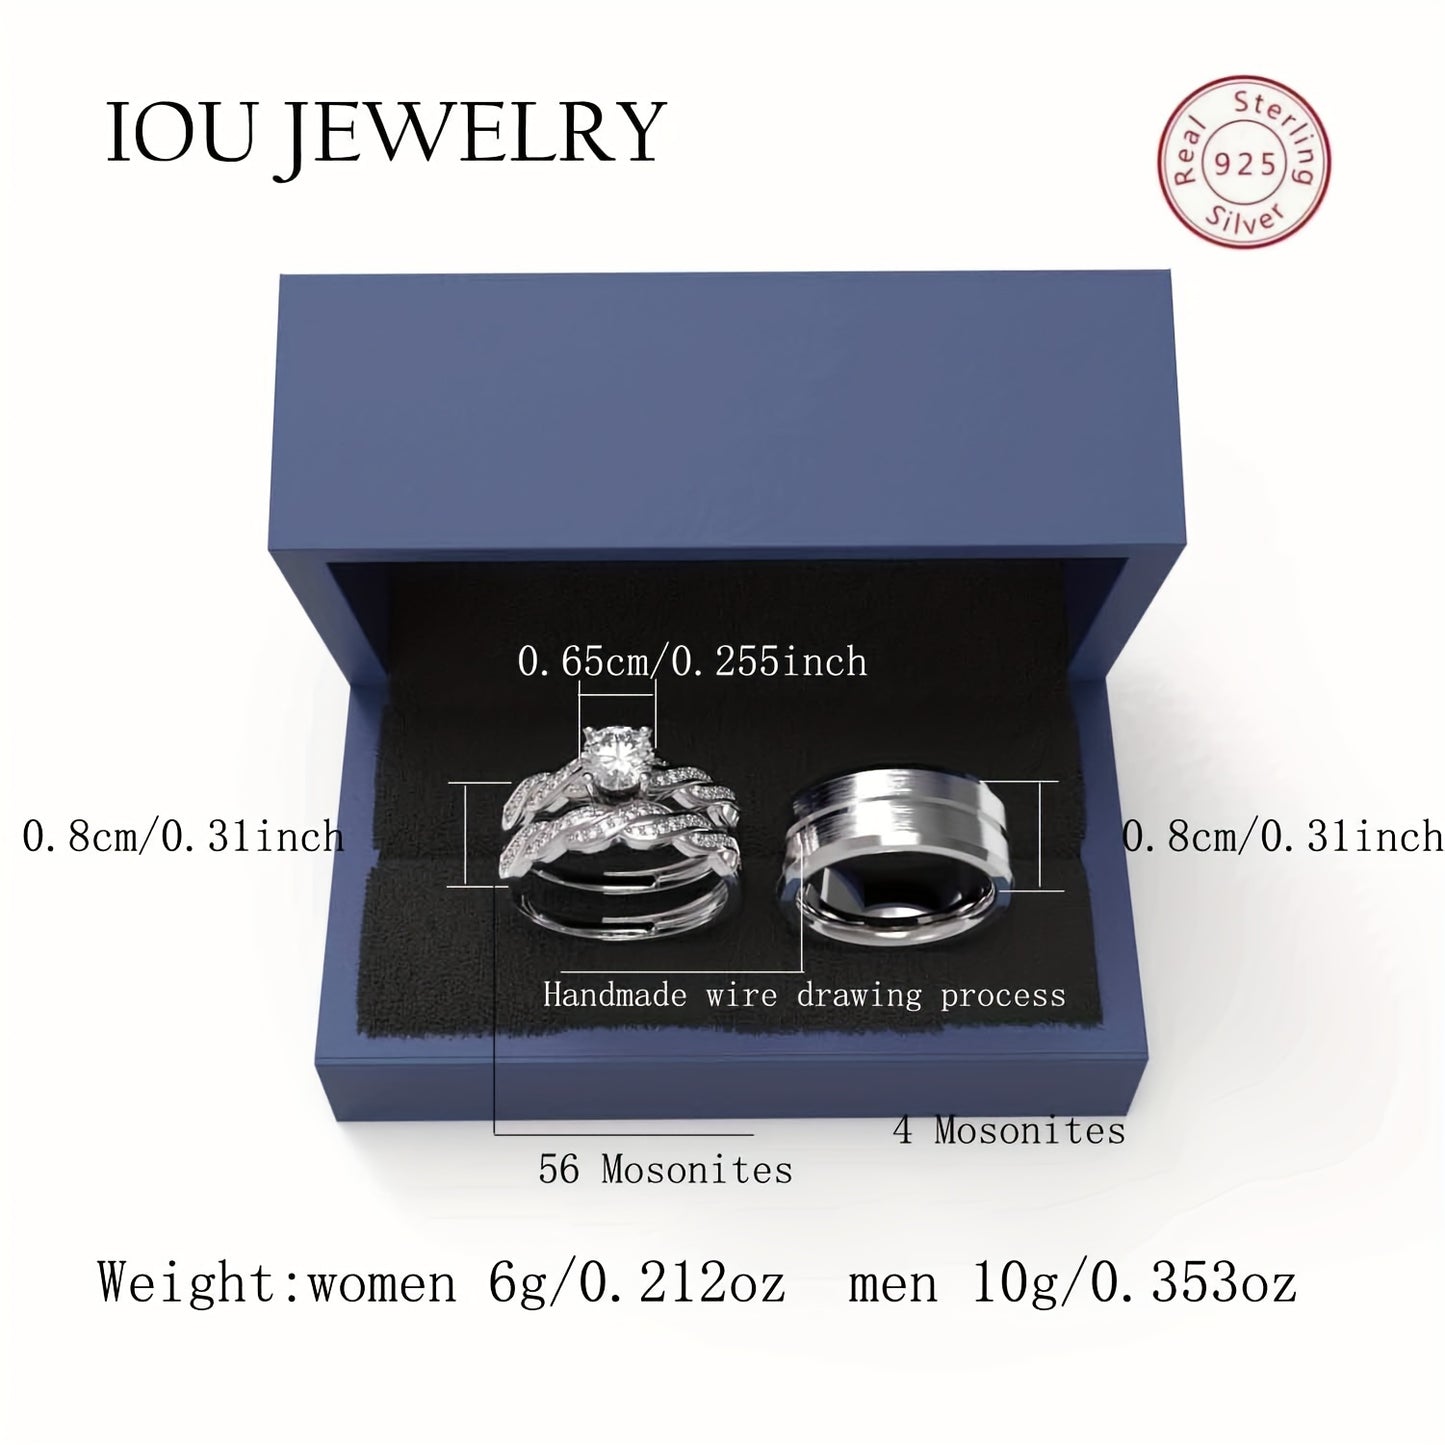 Wedding Ring Sets His And Hers Promise Ring Couples Bridal Sets Women 925 Sterling Silver Round Cut Moissanite Man Moissanite Wedding Bands With high-quality Jewelry Box Bee's to Find